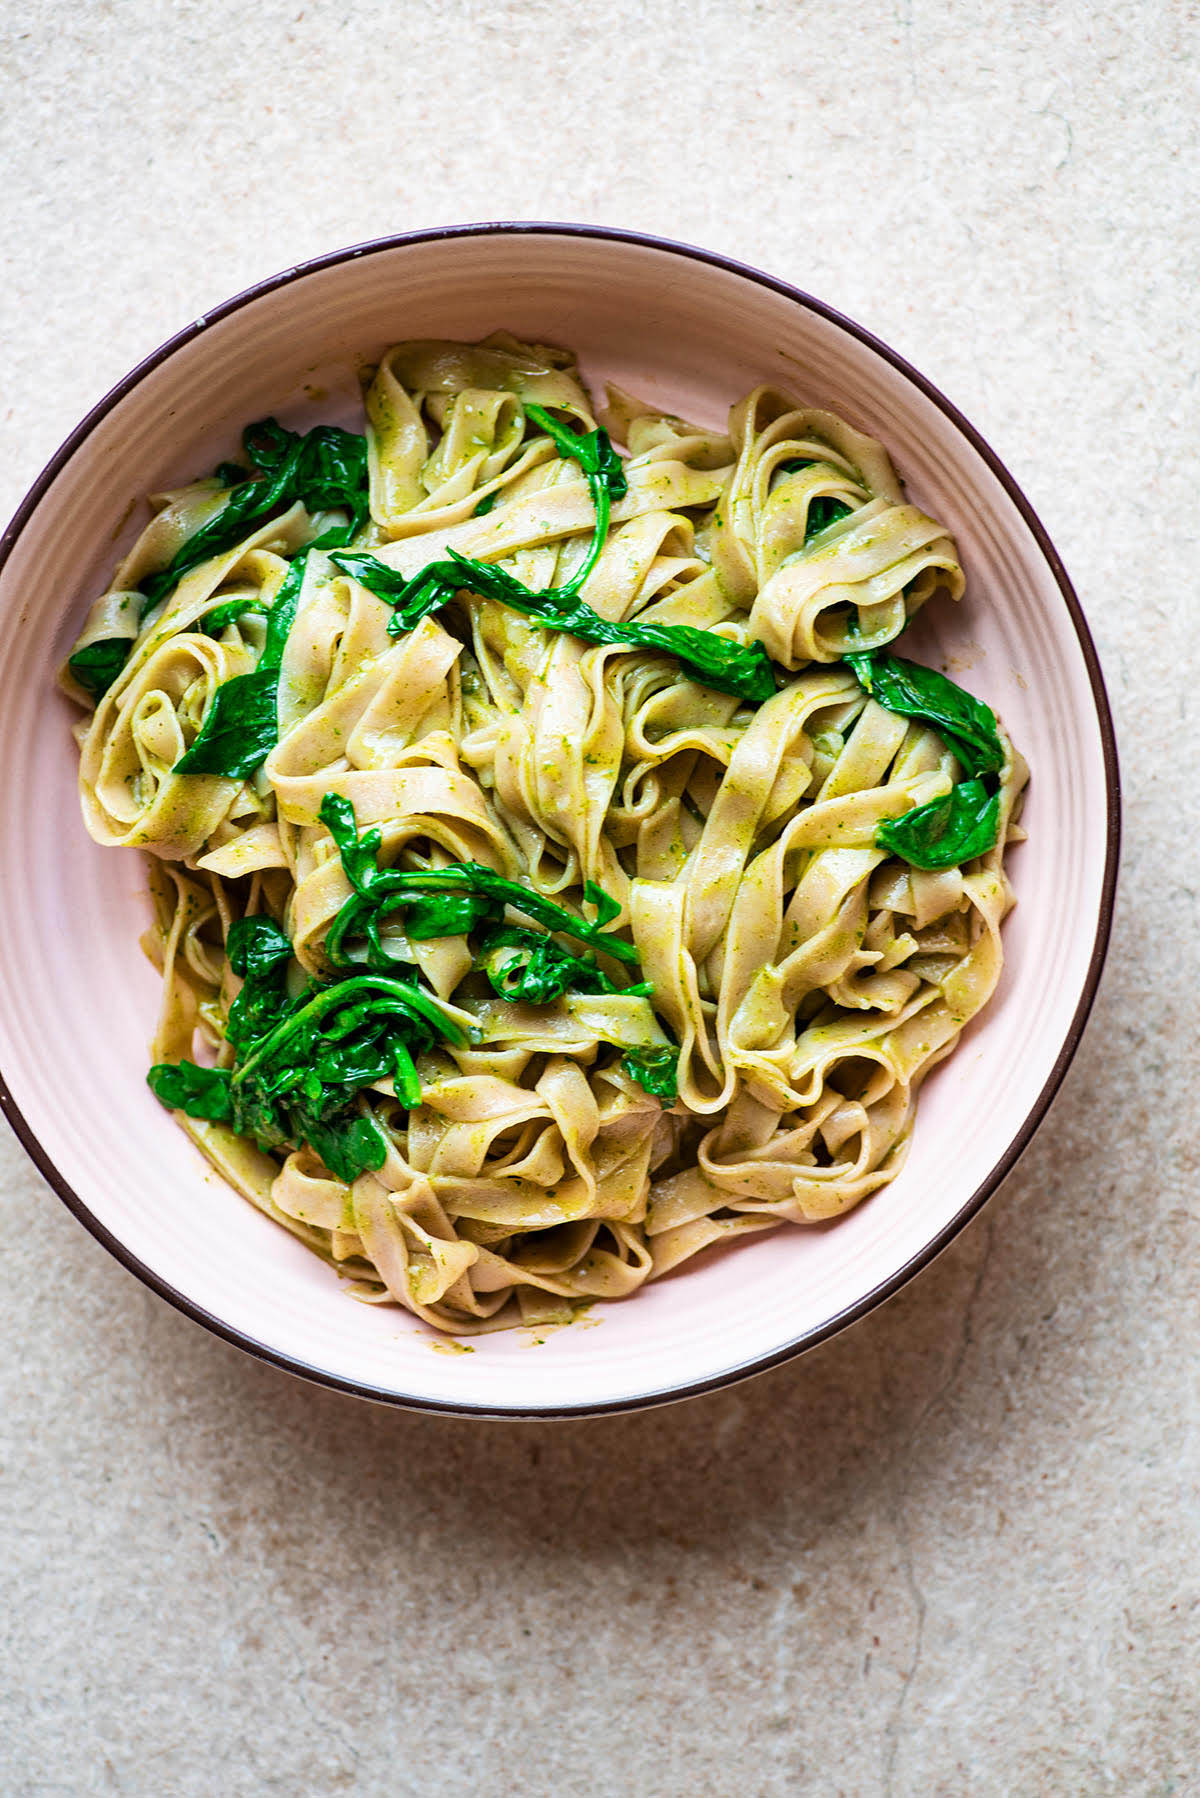 A bowl of fettuccine with pesto and greens.